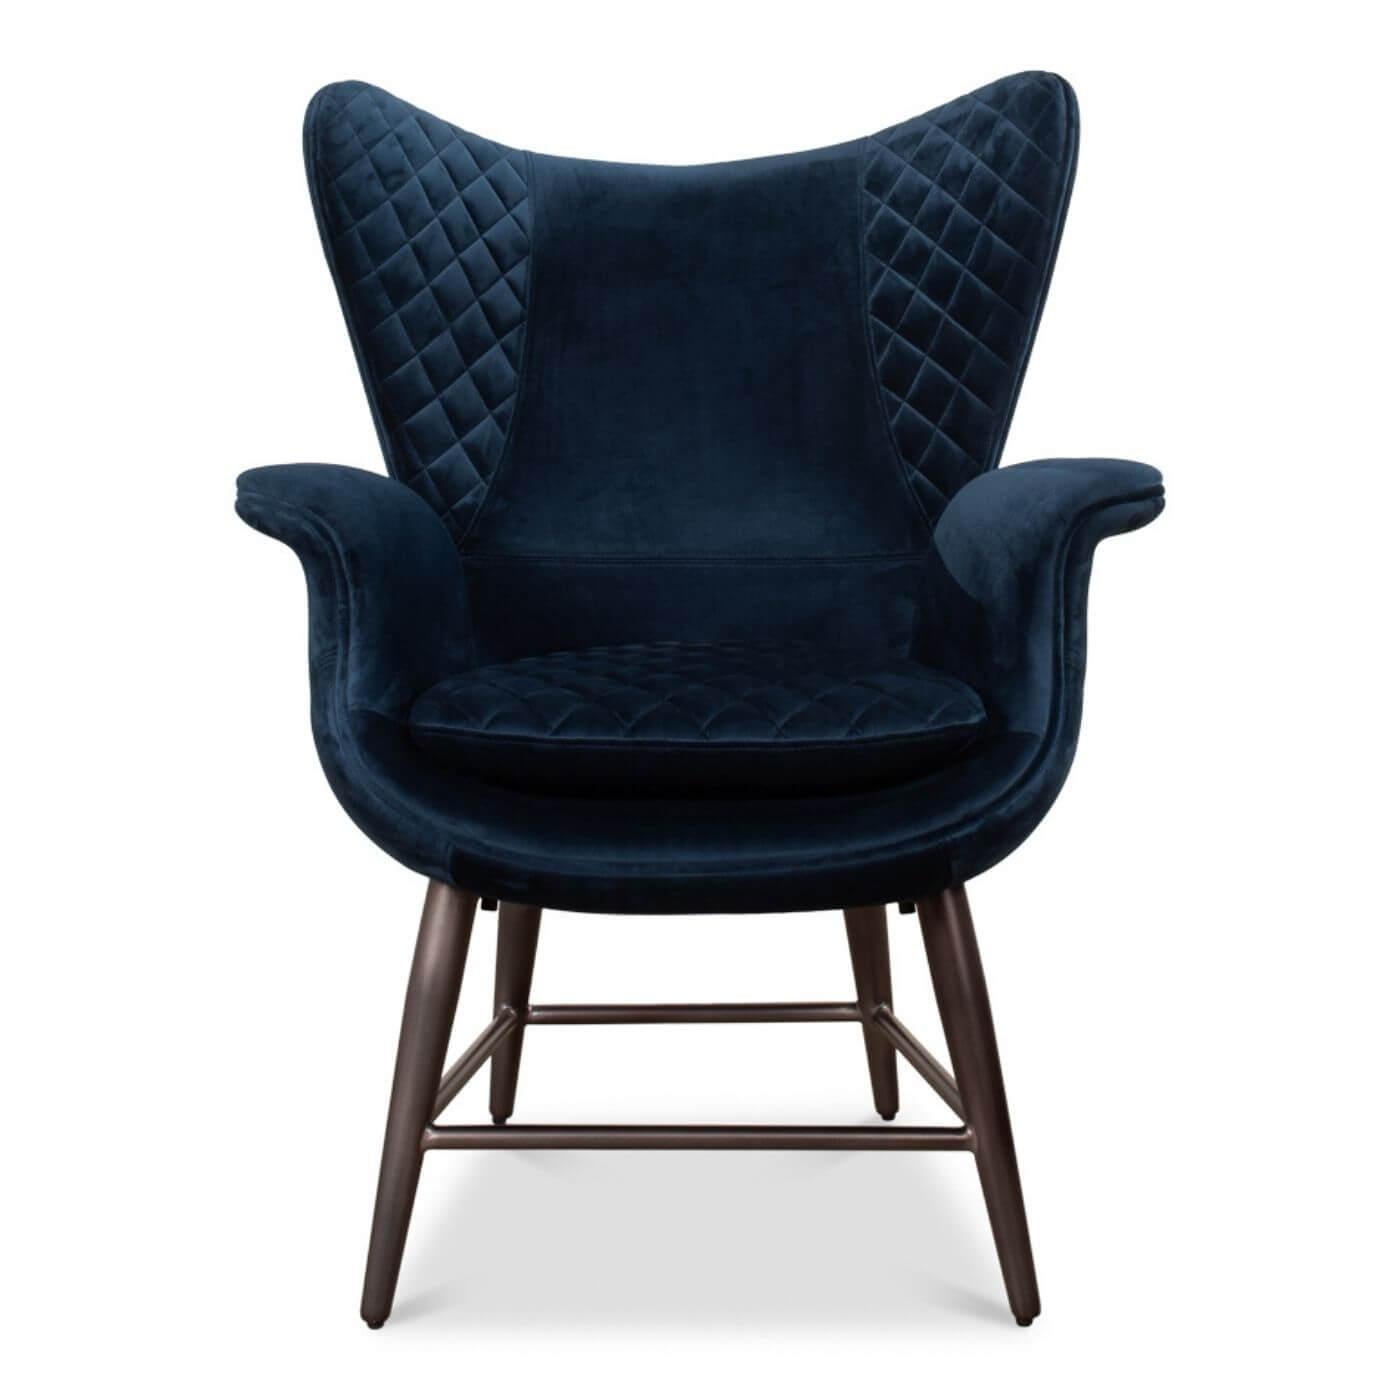 A mid-century style velvet armchair with navy blue velvet upholstery, with a diamond-quilted interior and topstitched seams. It features a curve-around design and rests on rich brown finished splayed legs. 

Dimensions: 32